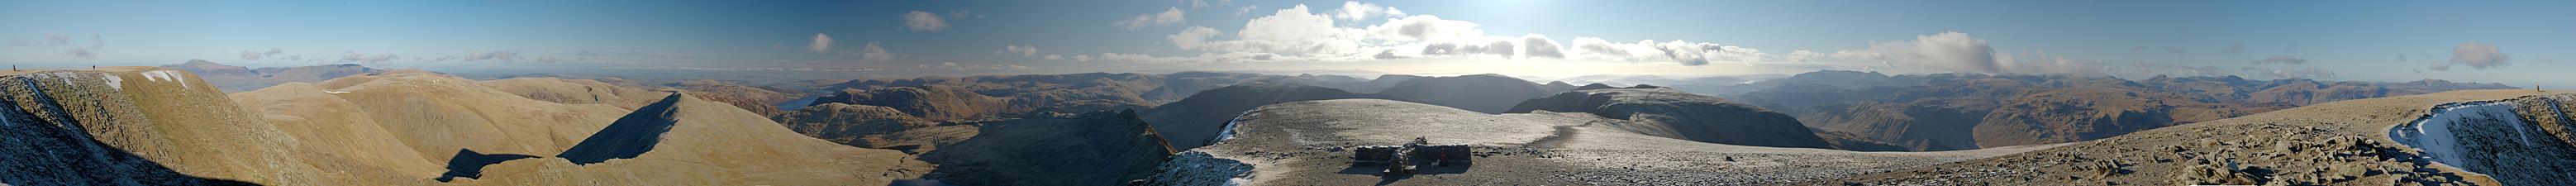 Helvellyn - Complete Panorama